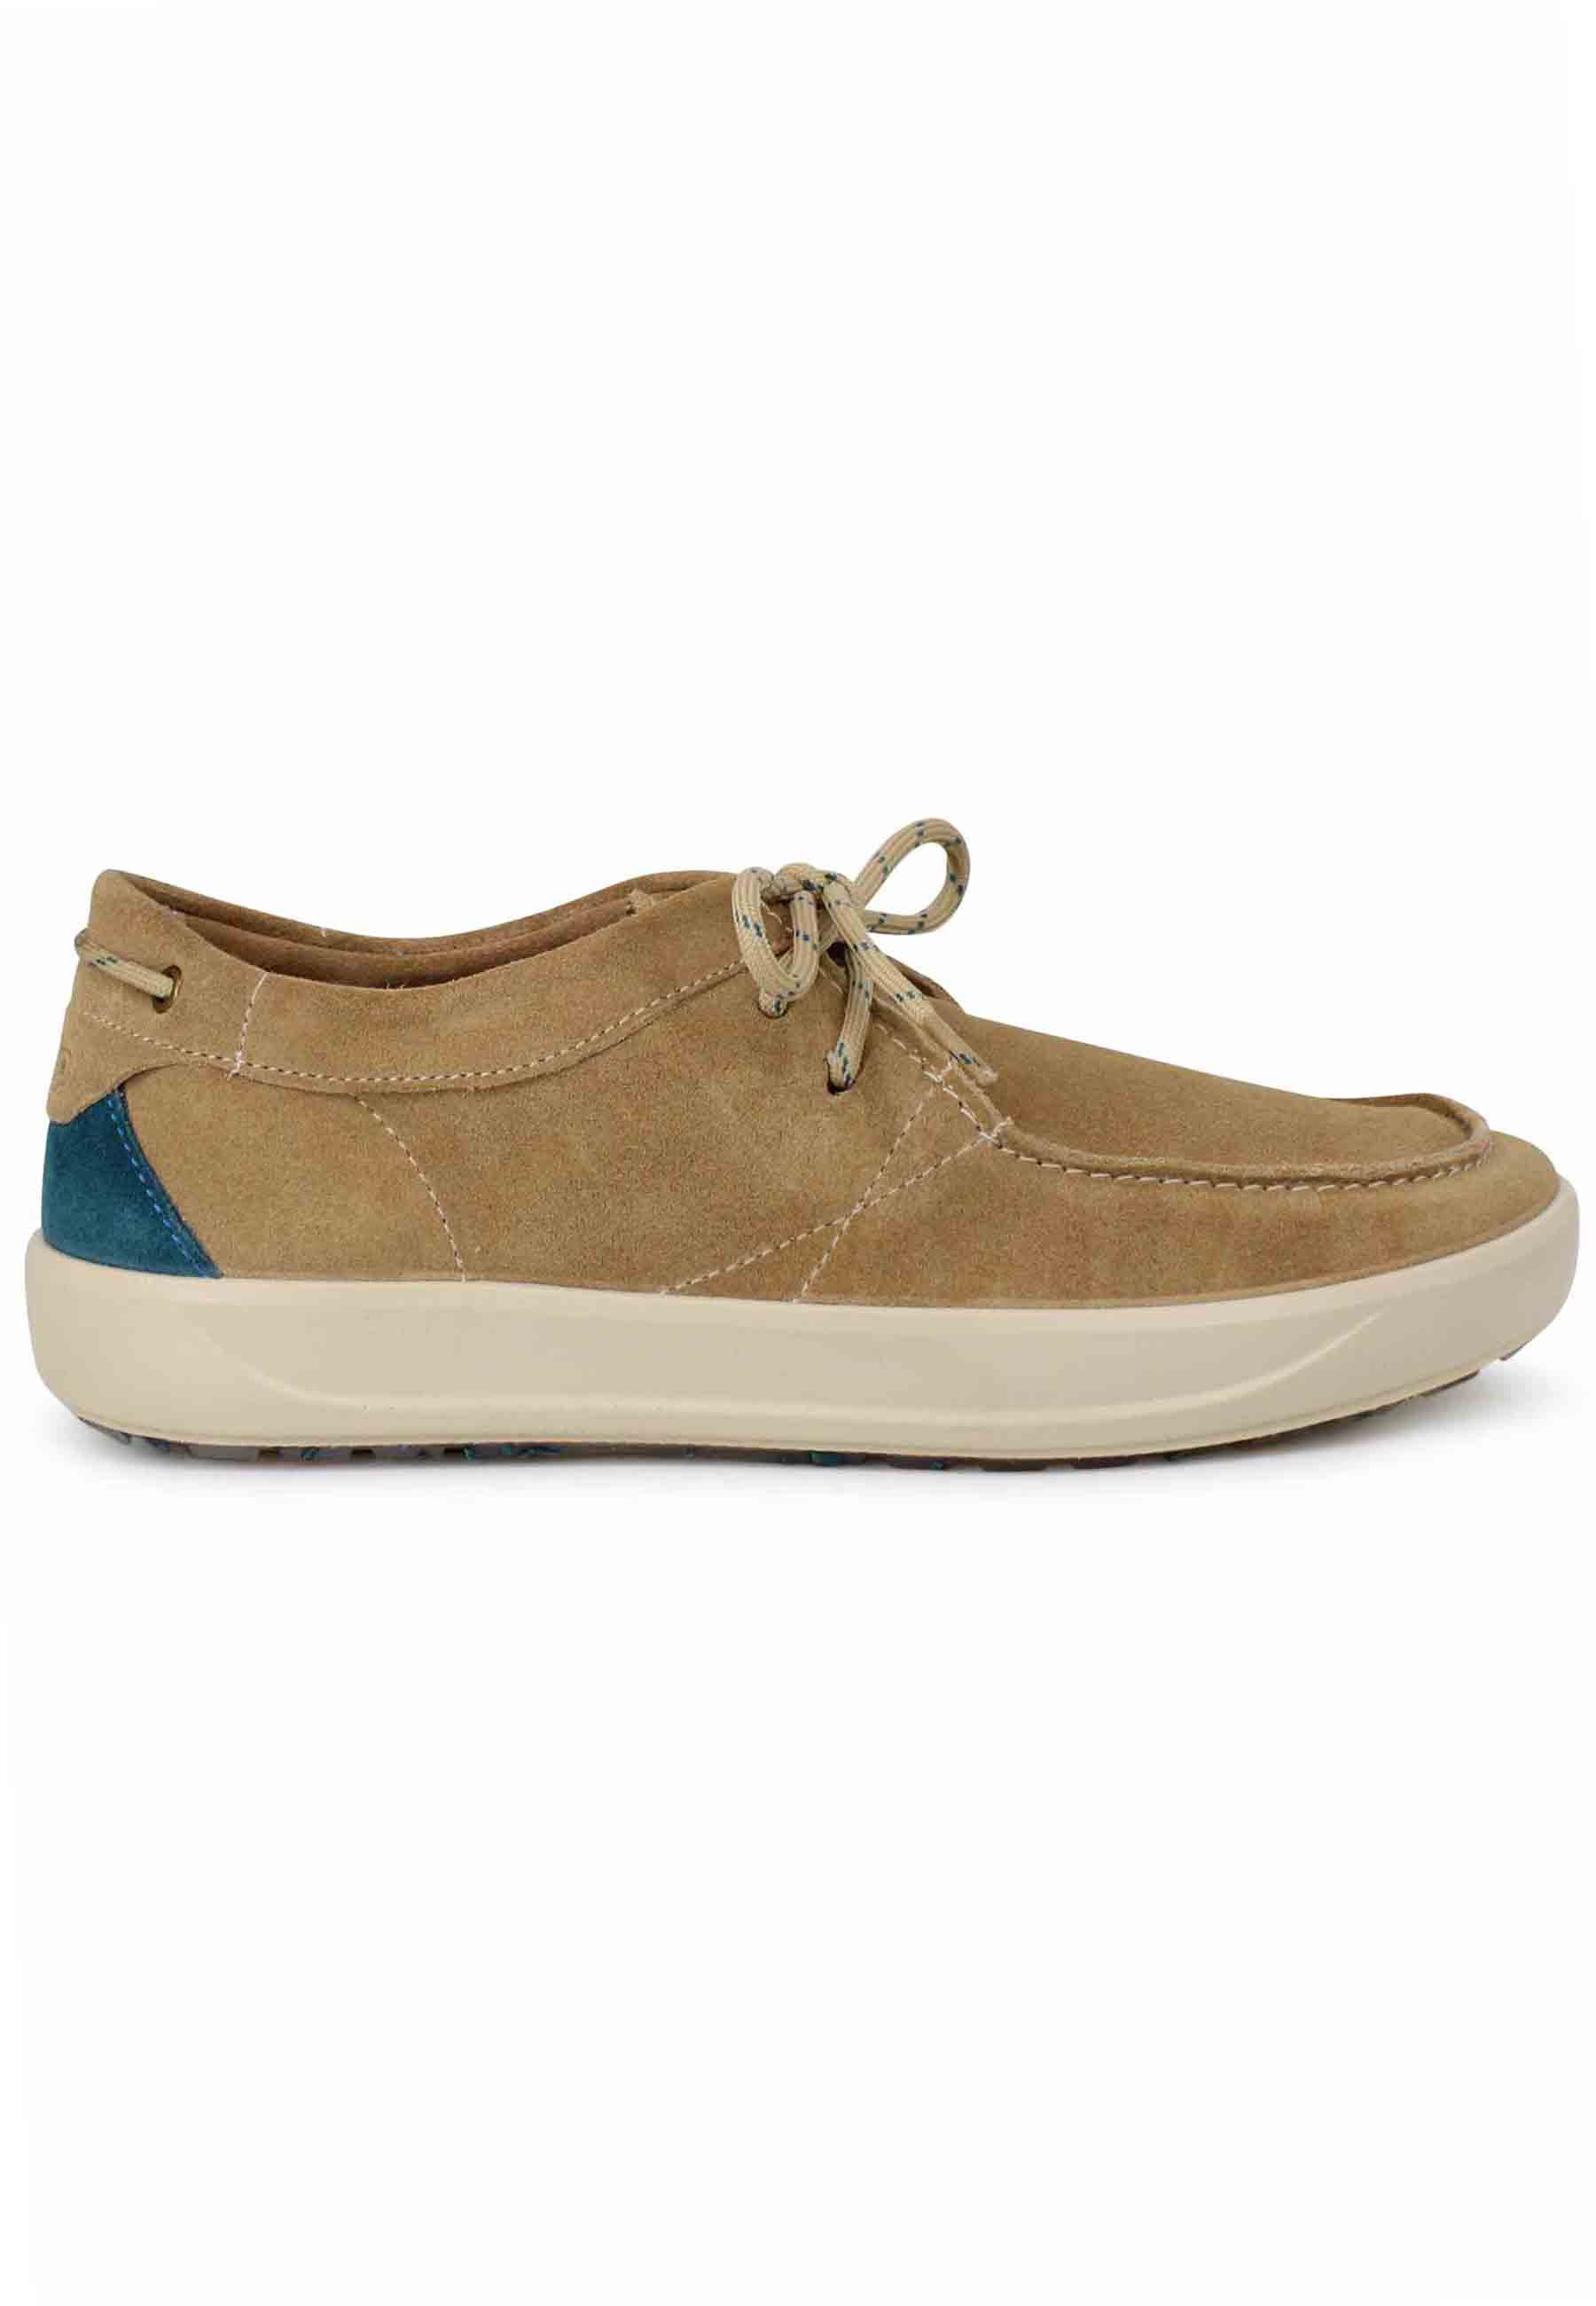 Bob Cat men's lace-ups in beige suede with rubber sole